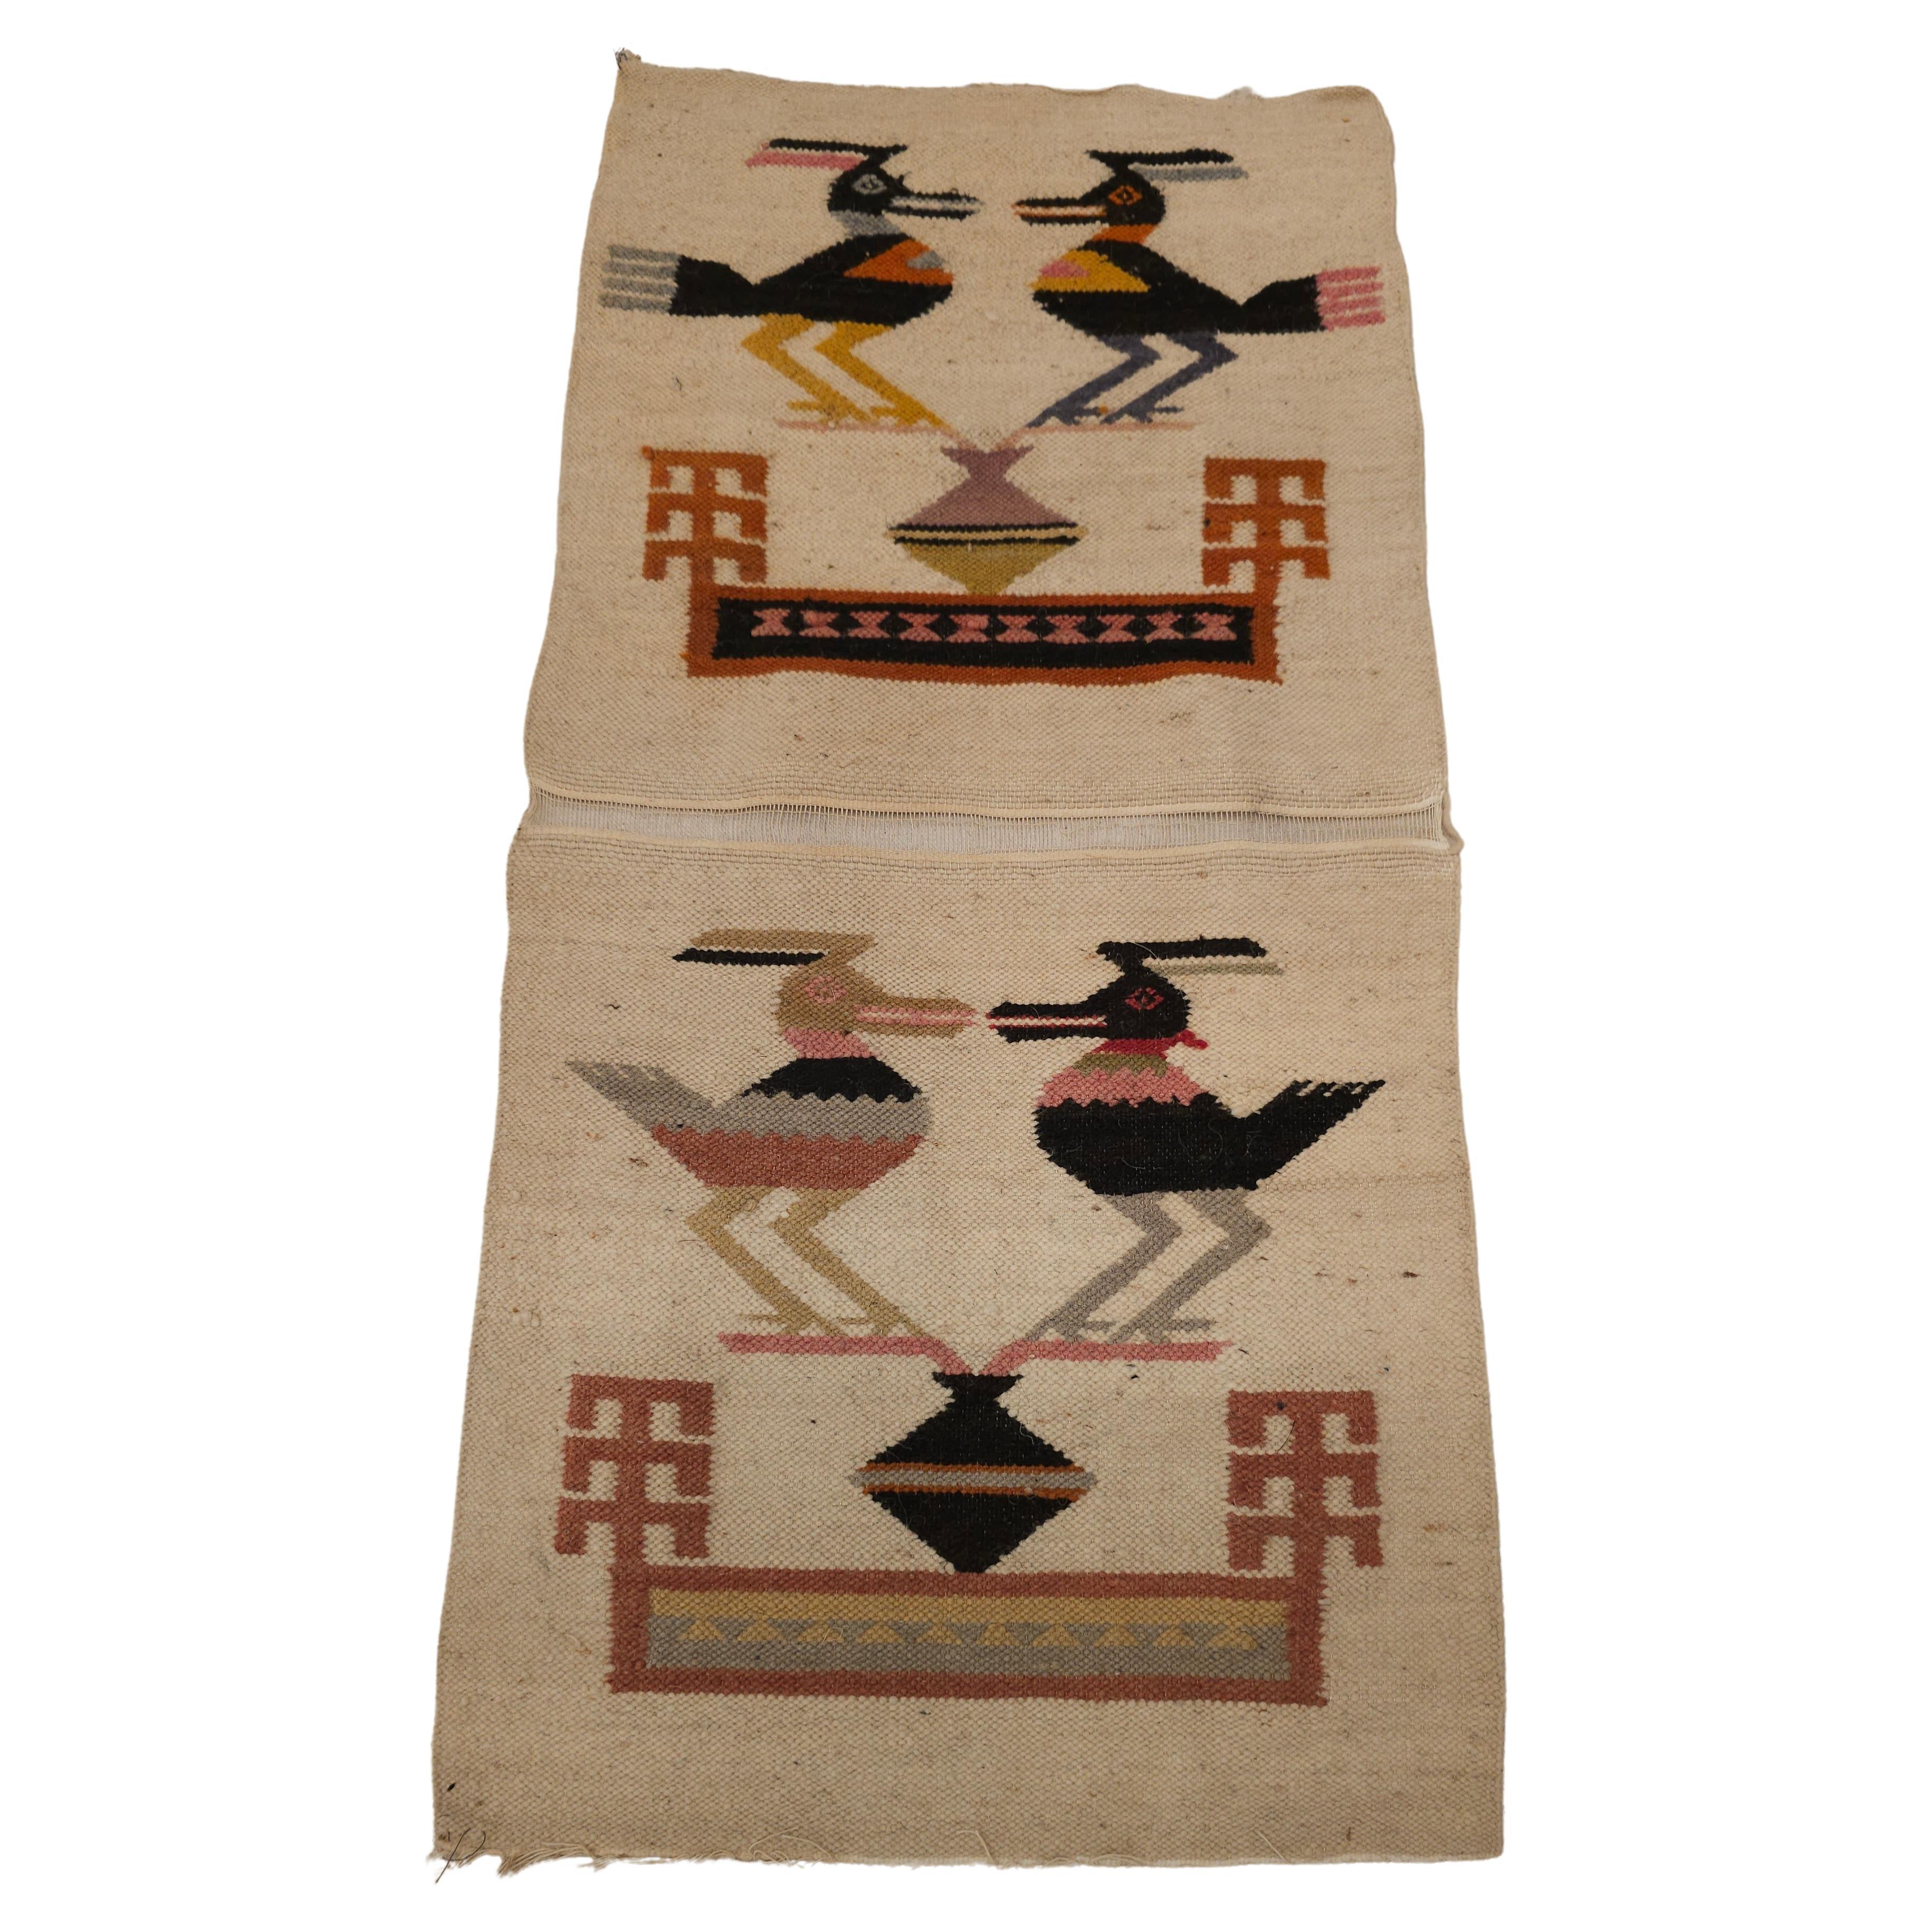 Vintage Native American Navajo Pictorial Rug with the Birds Design hand-woven in the SW United States in the mid 1900s. Because the birds can fly and be between earth and the skies, they have a special meaning in the Native American culture and are